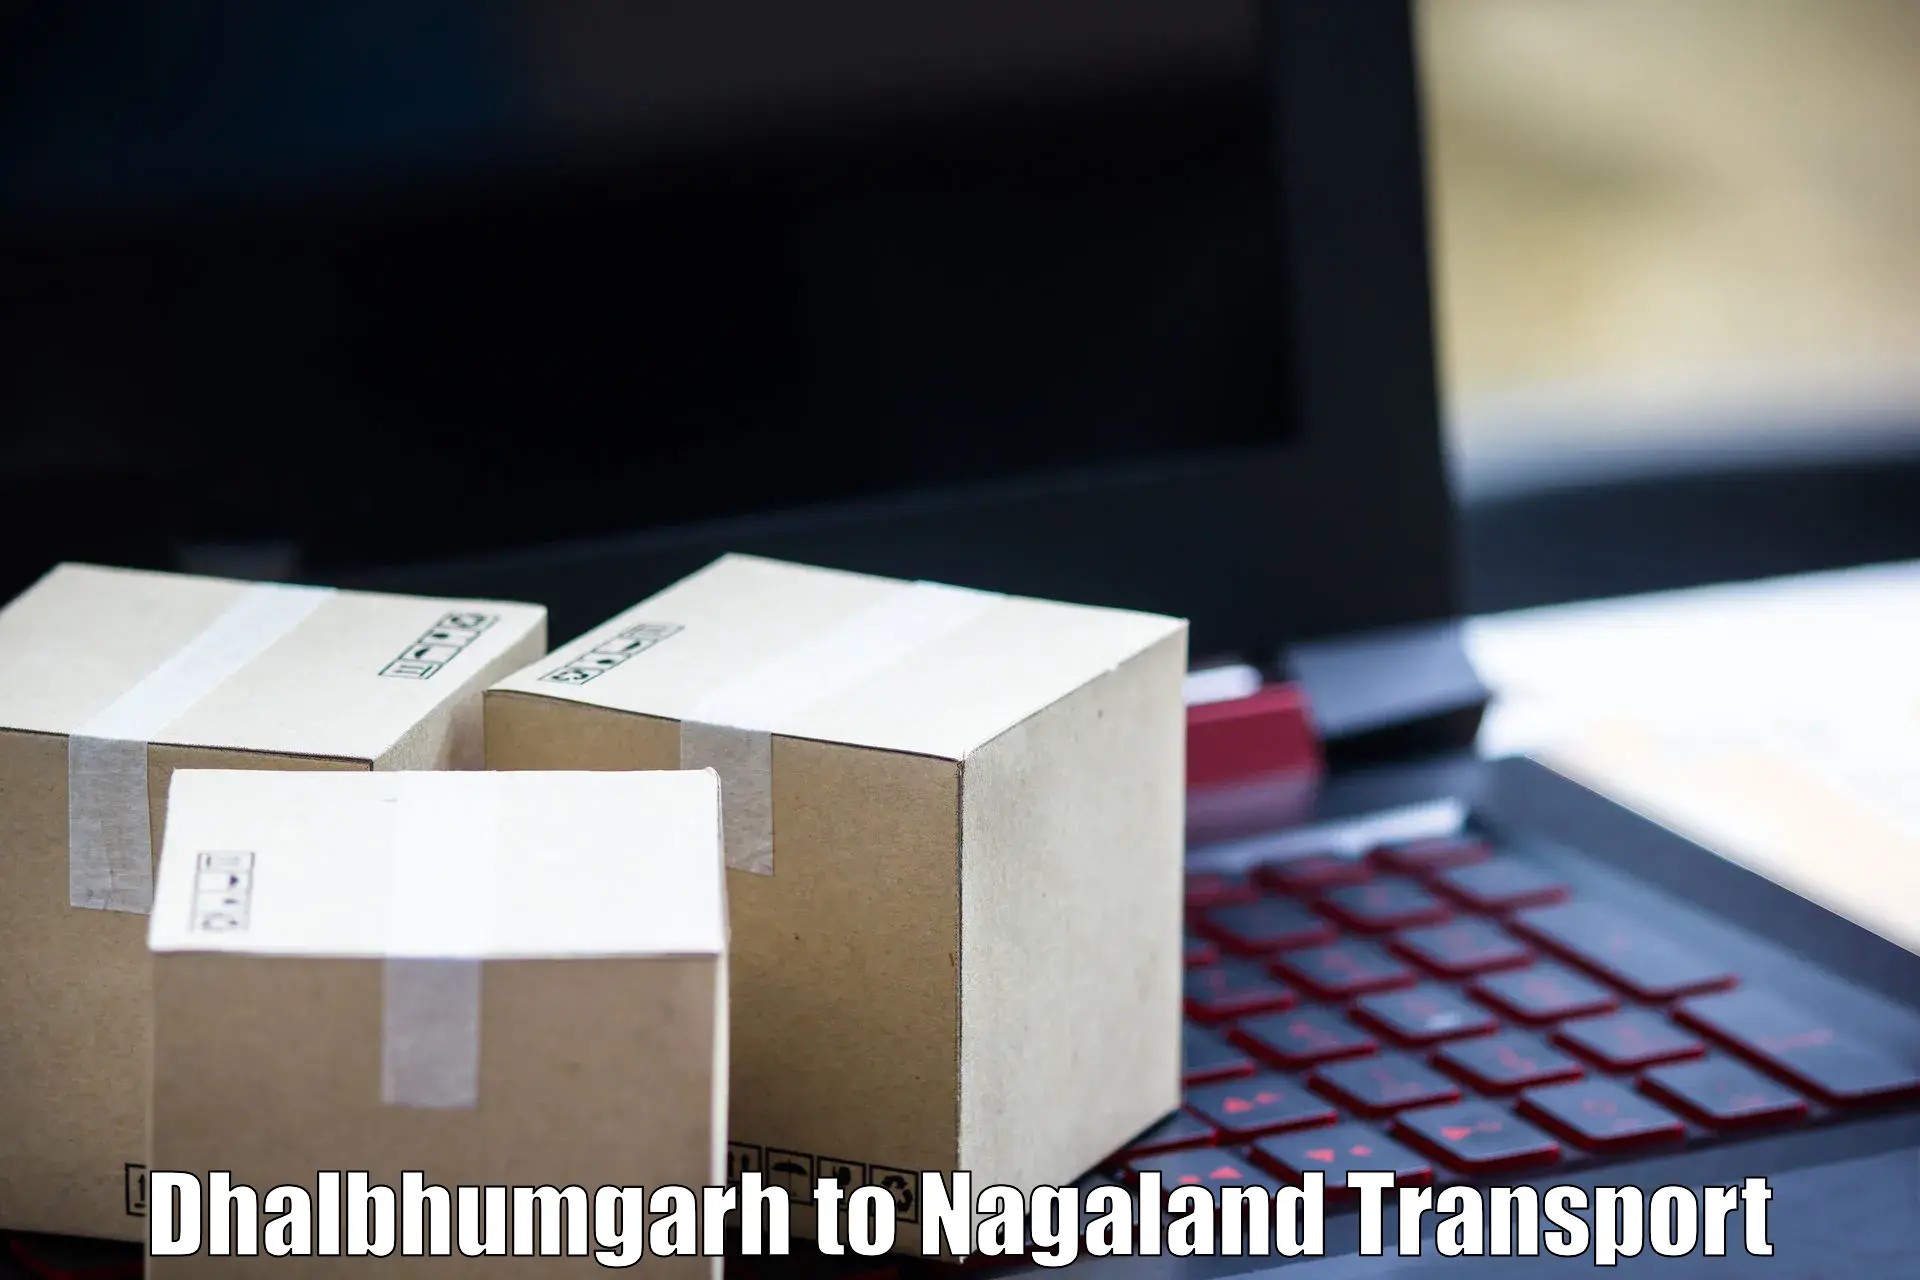 Container transport service Dhalbhumgarh to Longleng